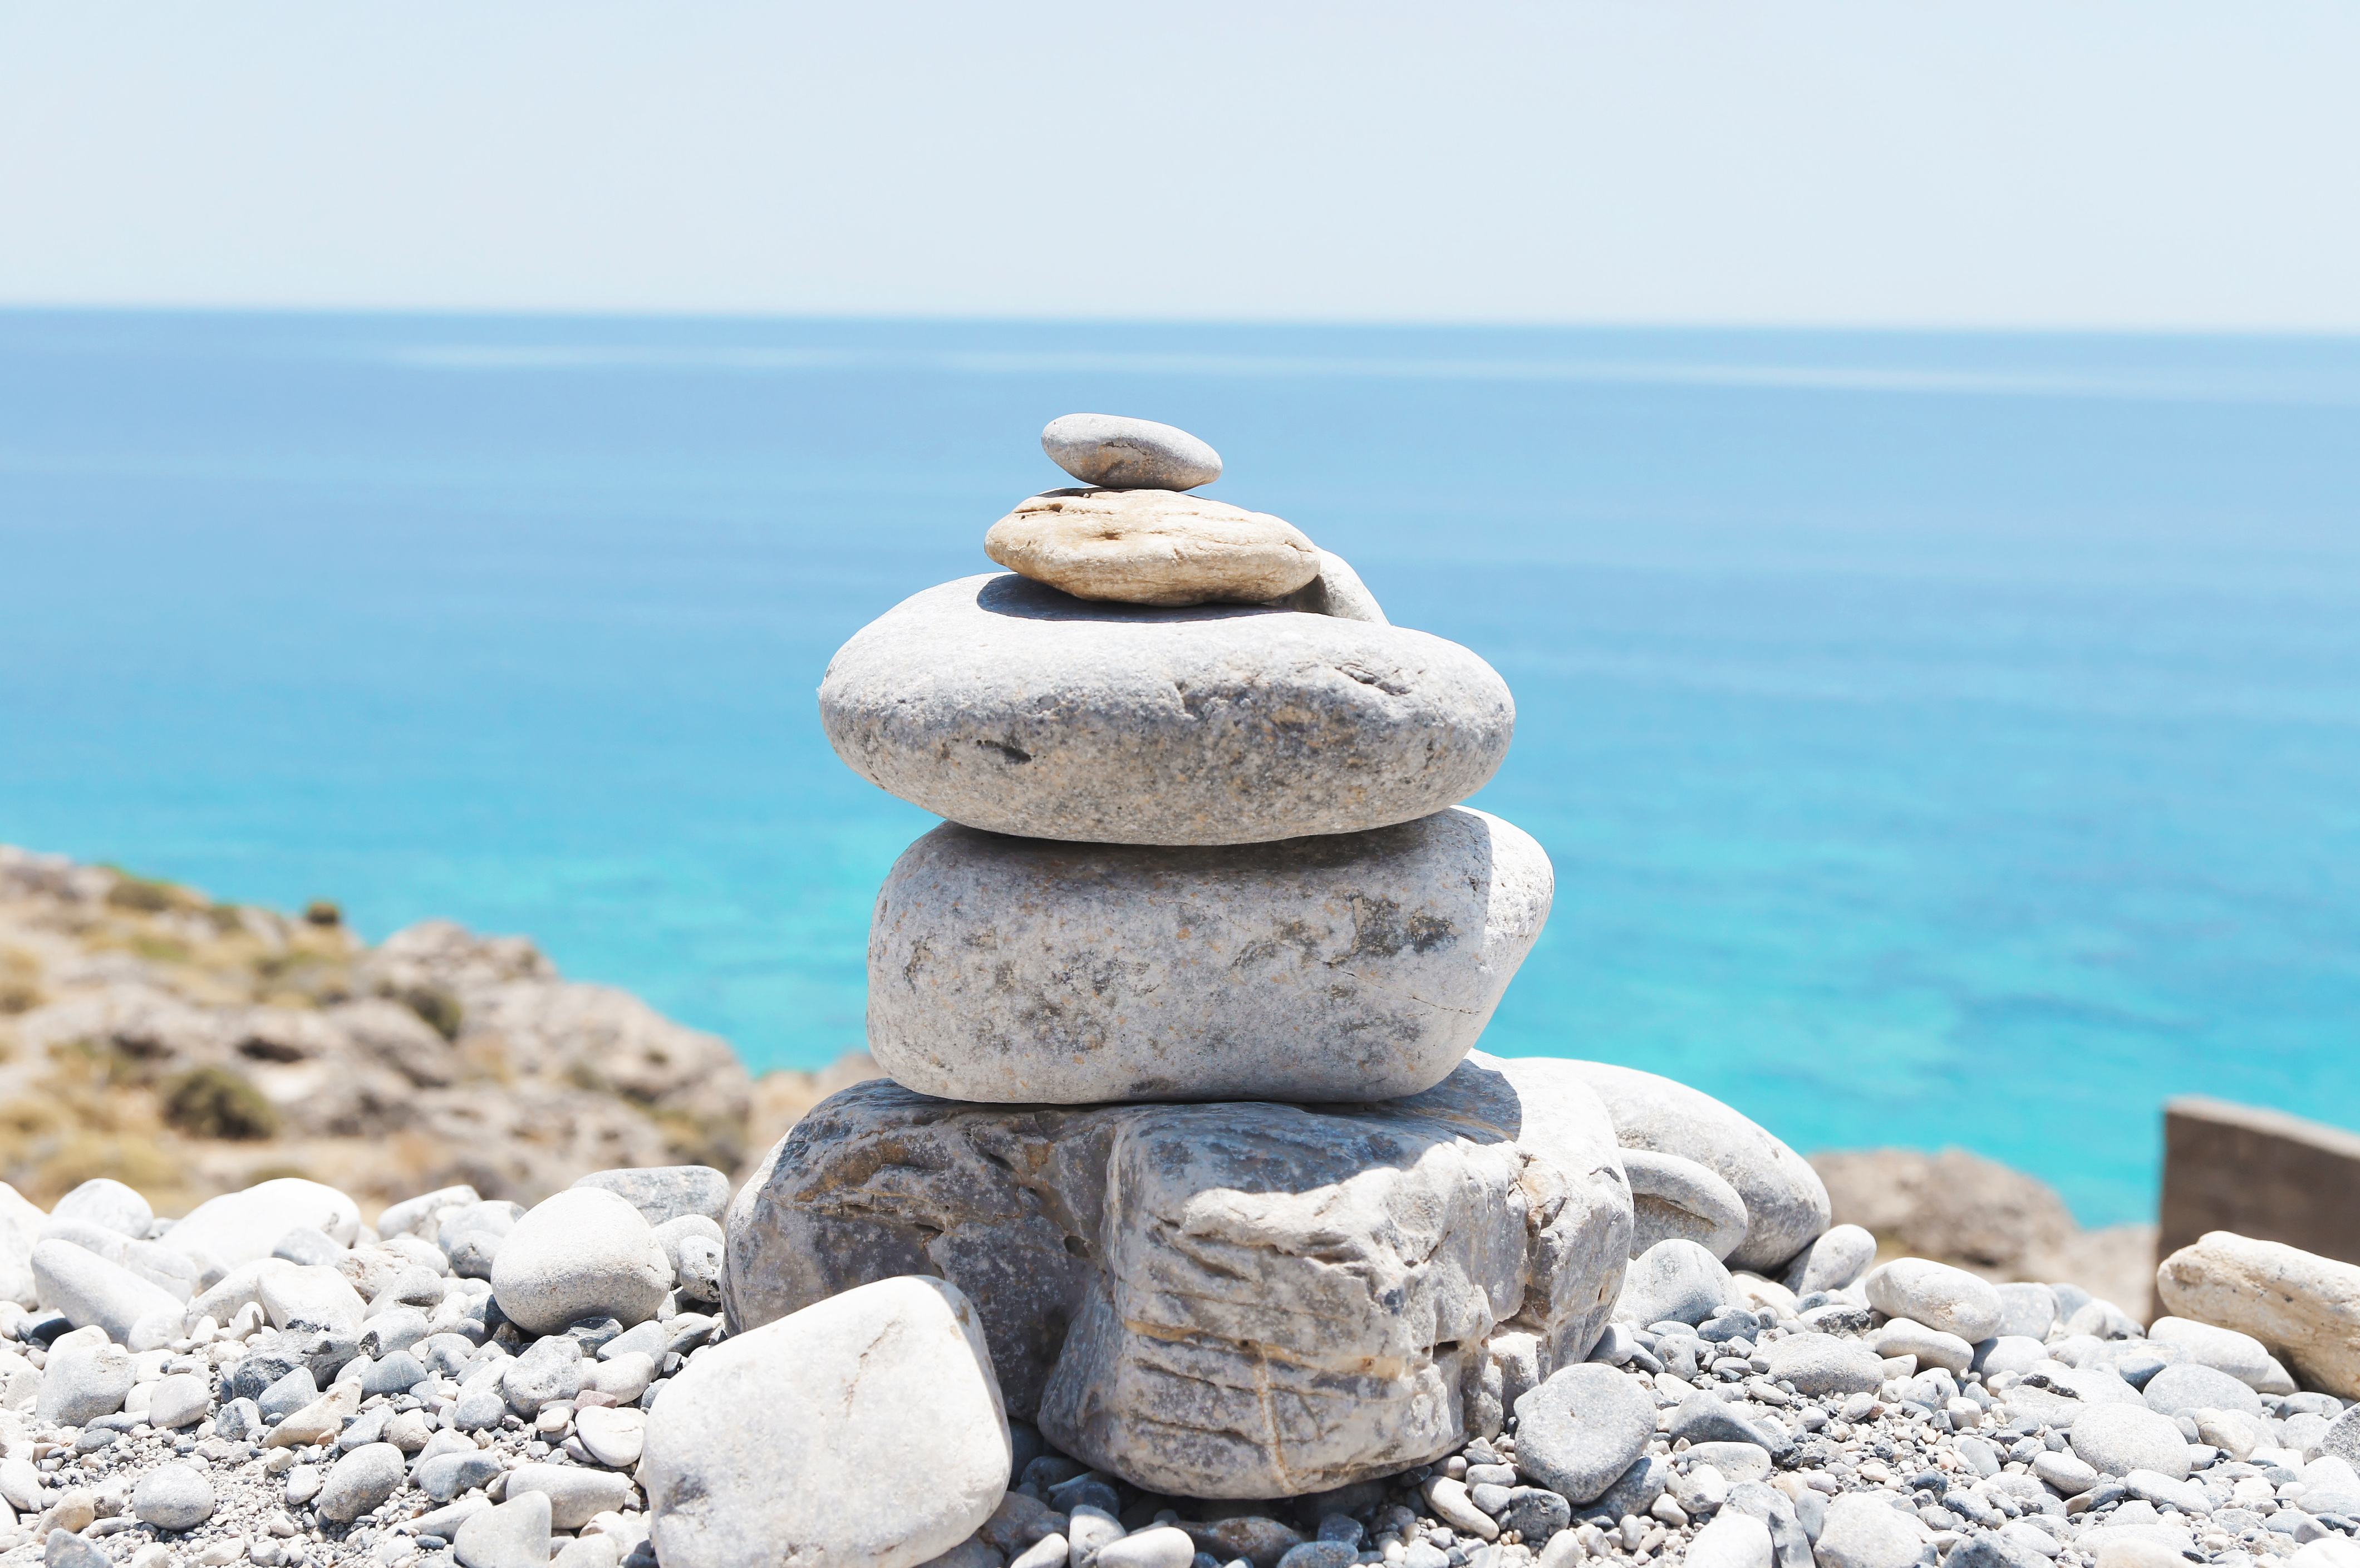 Balanced stack of stones over sea background - Our Great Photos